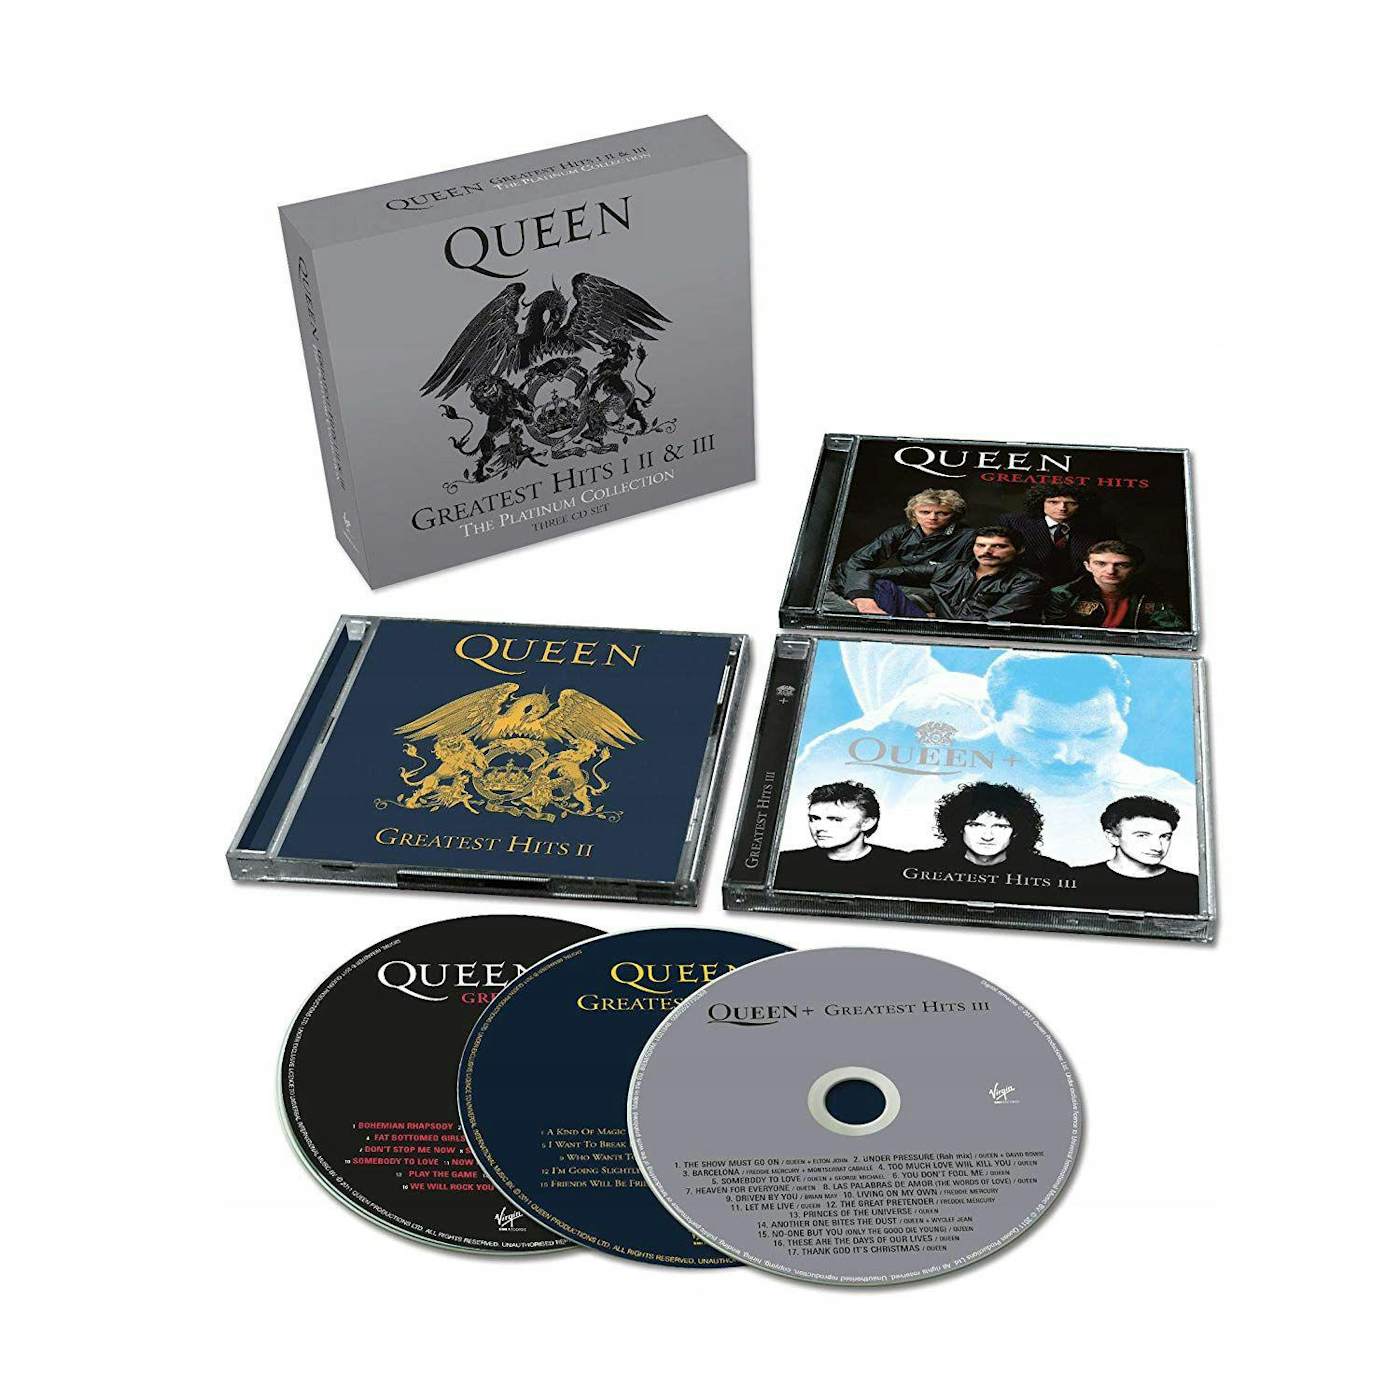 Queen Greatest Hits I II & III: The Platinum Collection CD Box Set